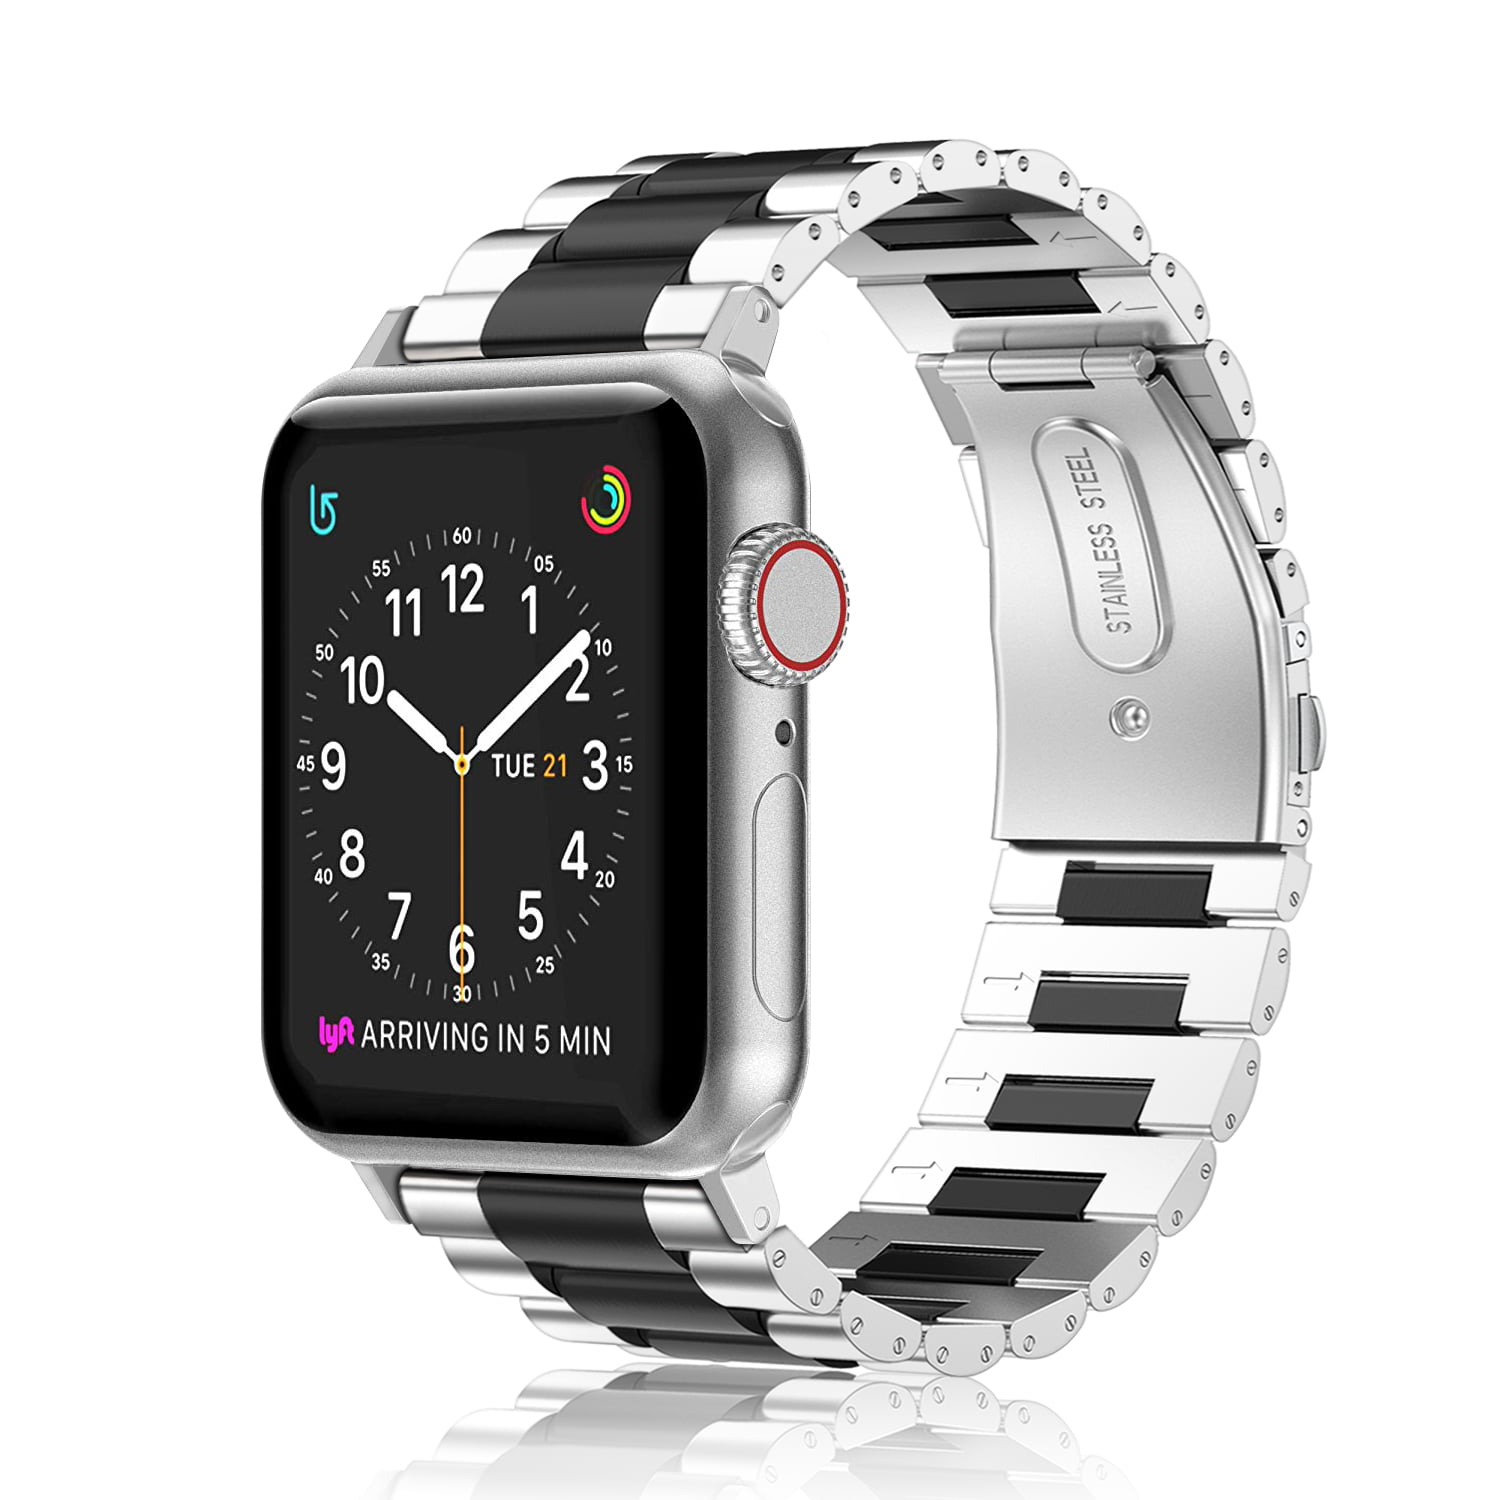 Fintie - Fintie Watchband for Apple Watch Band 42 44mm Series 6/5/4/3/2 Apple Watch 44mm Stainless Steel Band